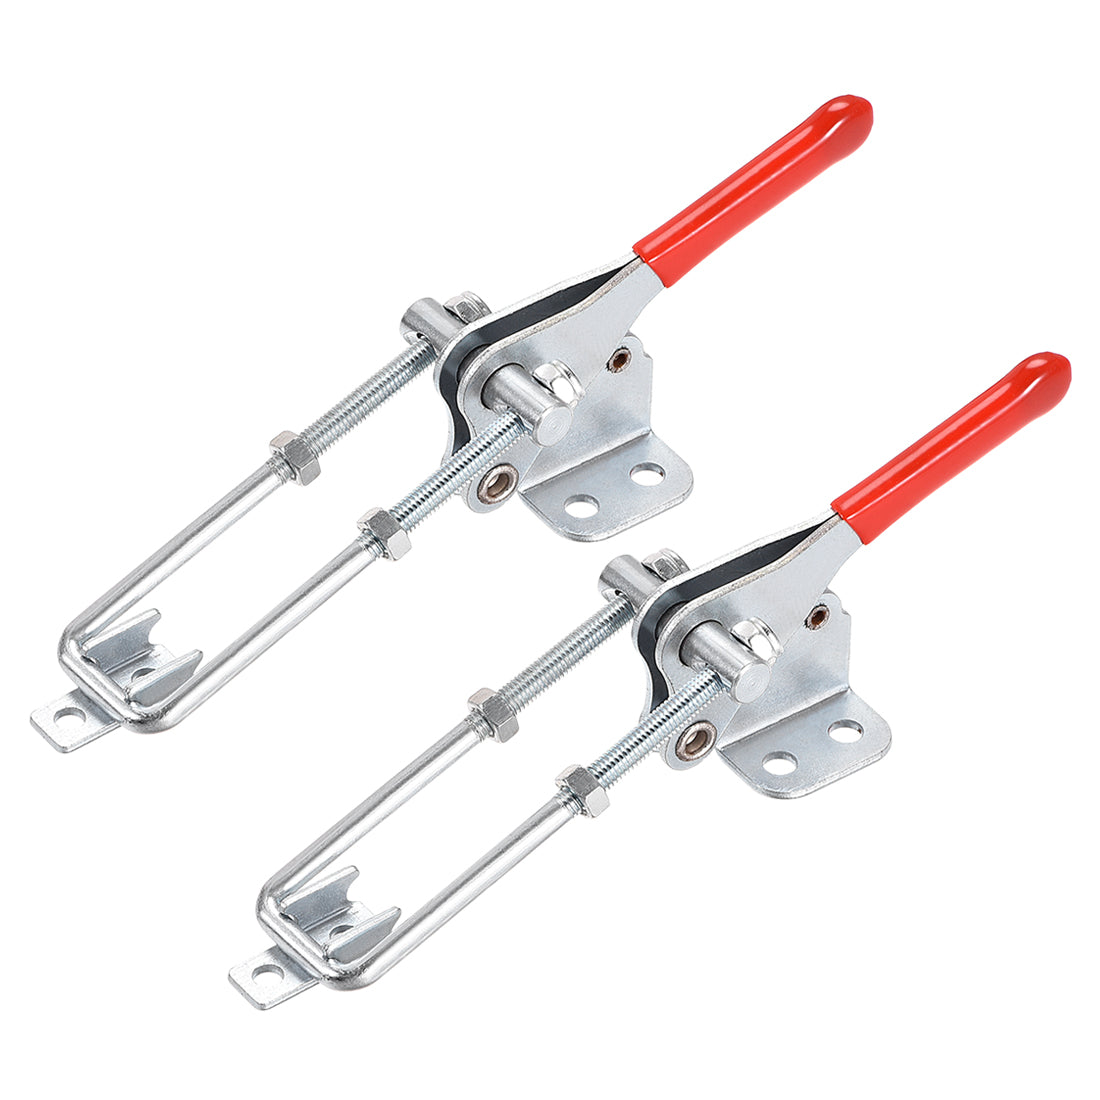 uxcell Uxcell 496lbs Smoker Toggle Pull Latch U Bolt Vertical Quick Release Clamp, 2 Pcs